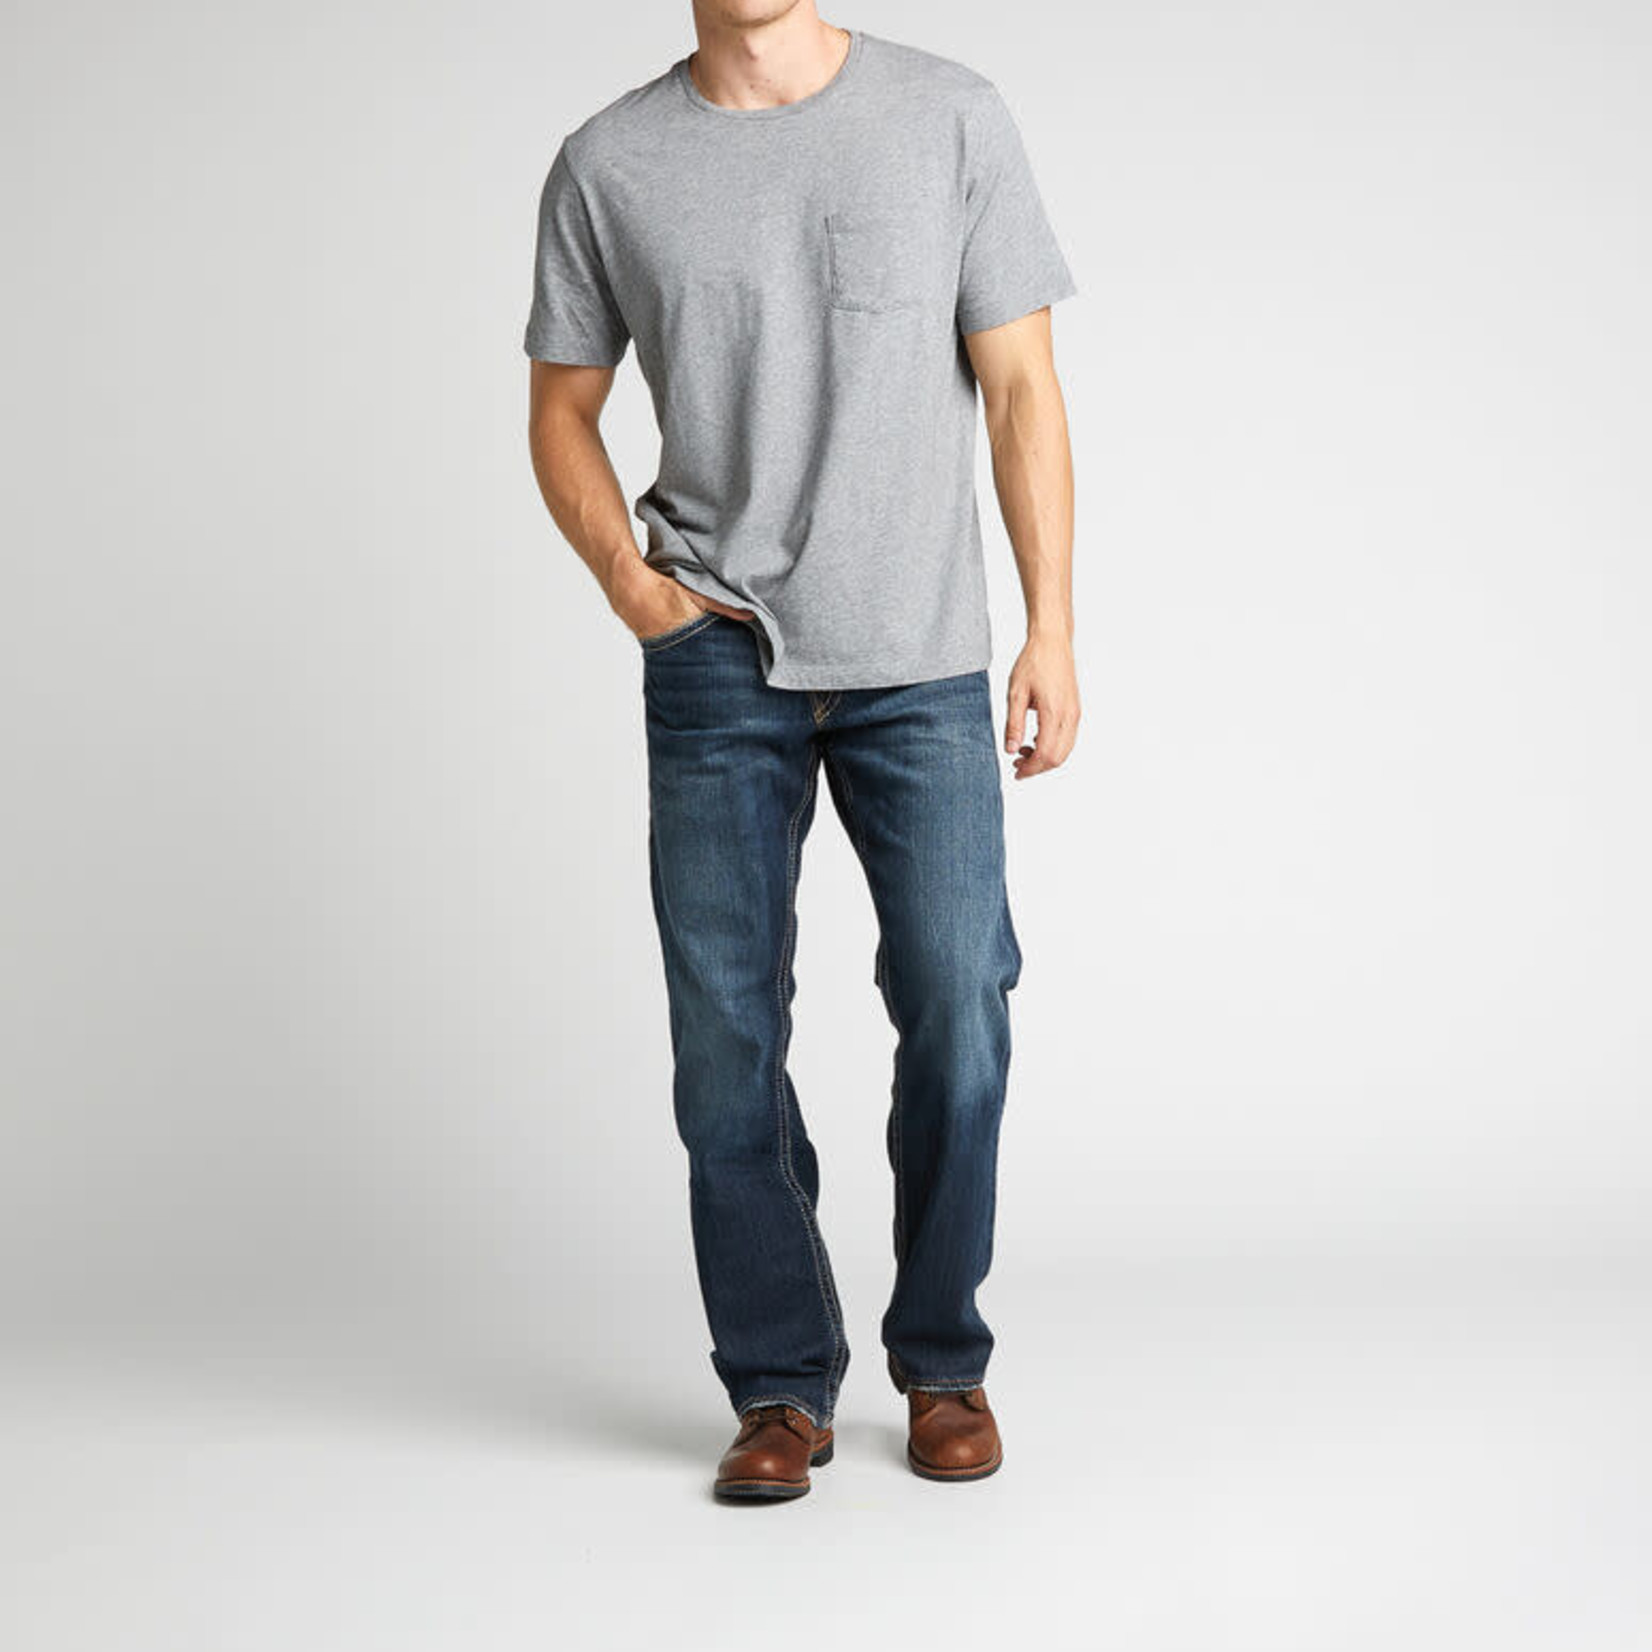 Silver Jeans The "Zac 418" by Silver Jeans